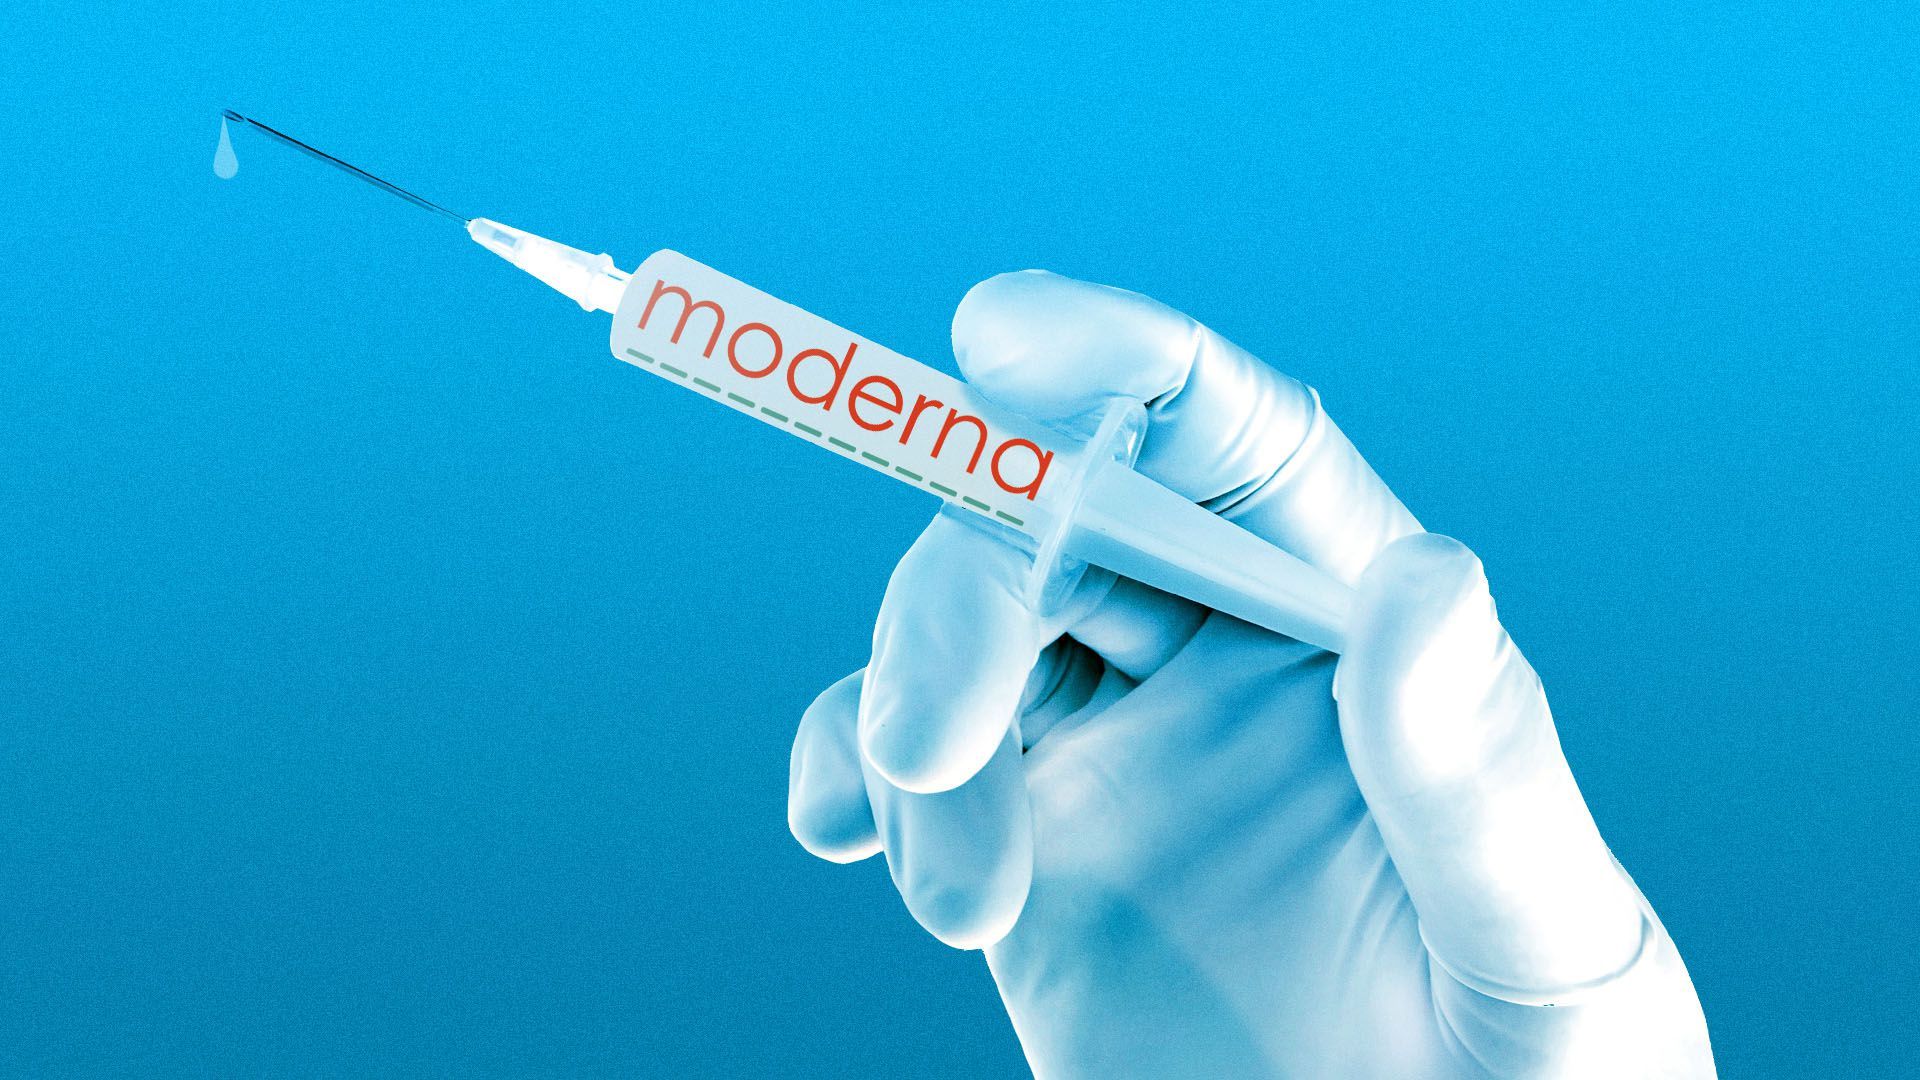 Illustration of a hand holding up a syringe that reads "Moderna" on the side